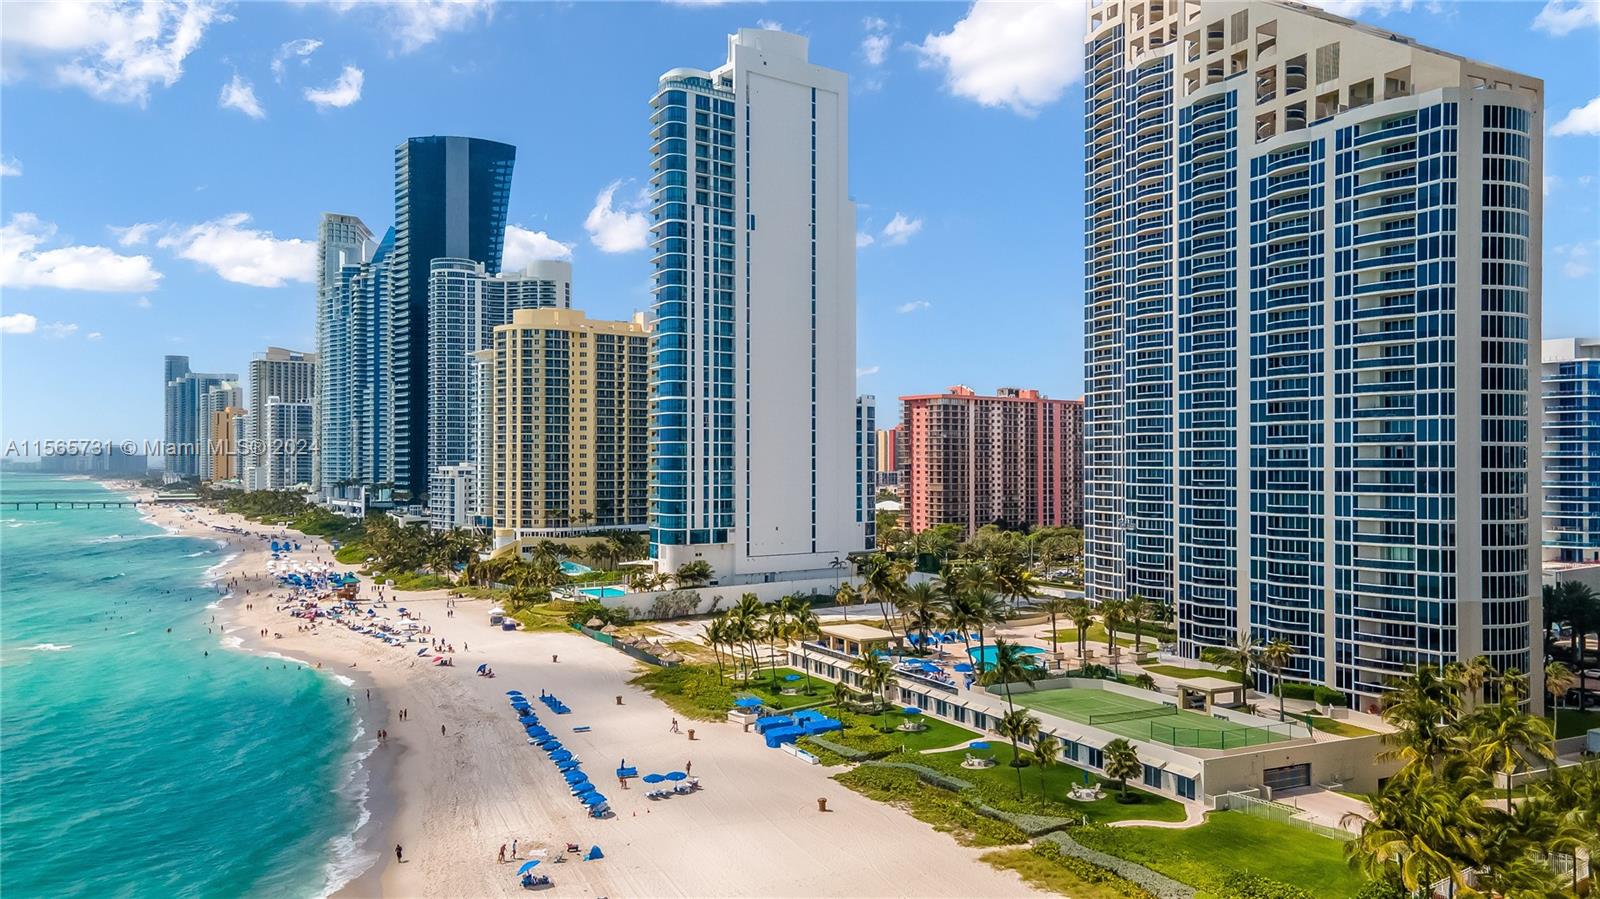 17555 Collins Ave (Avail until 12/1) #2501, Sunny Isles Beach FL 33160